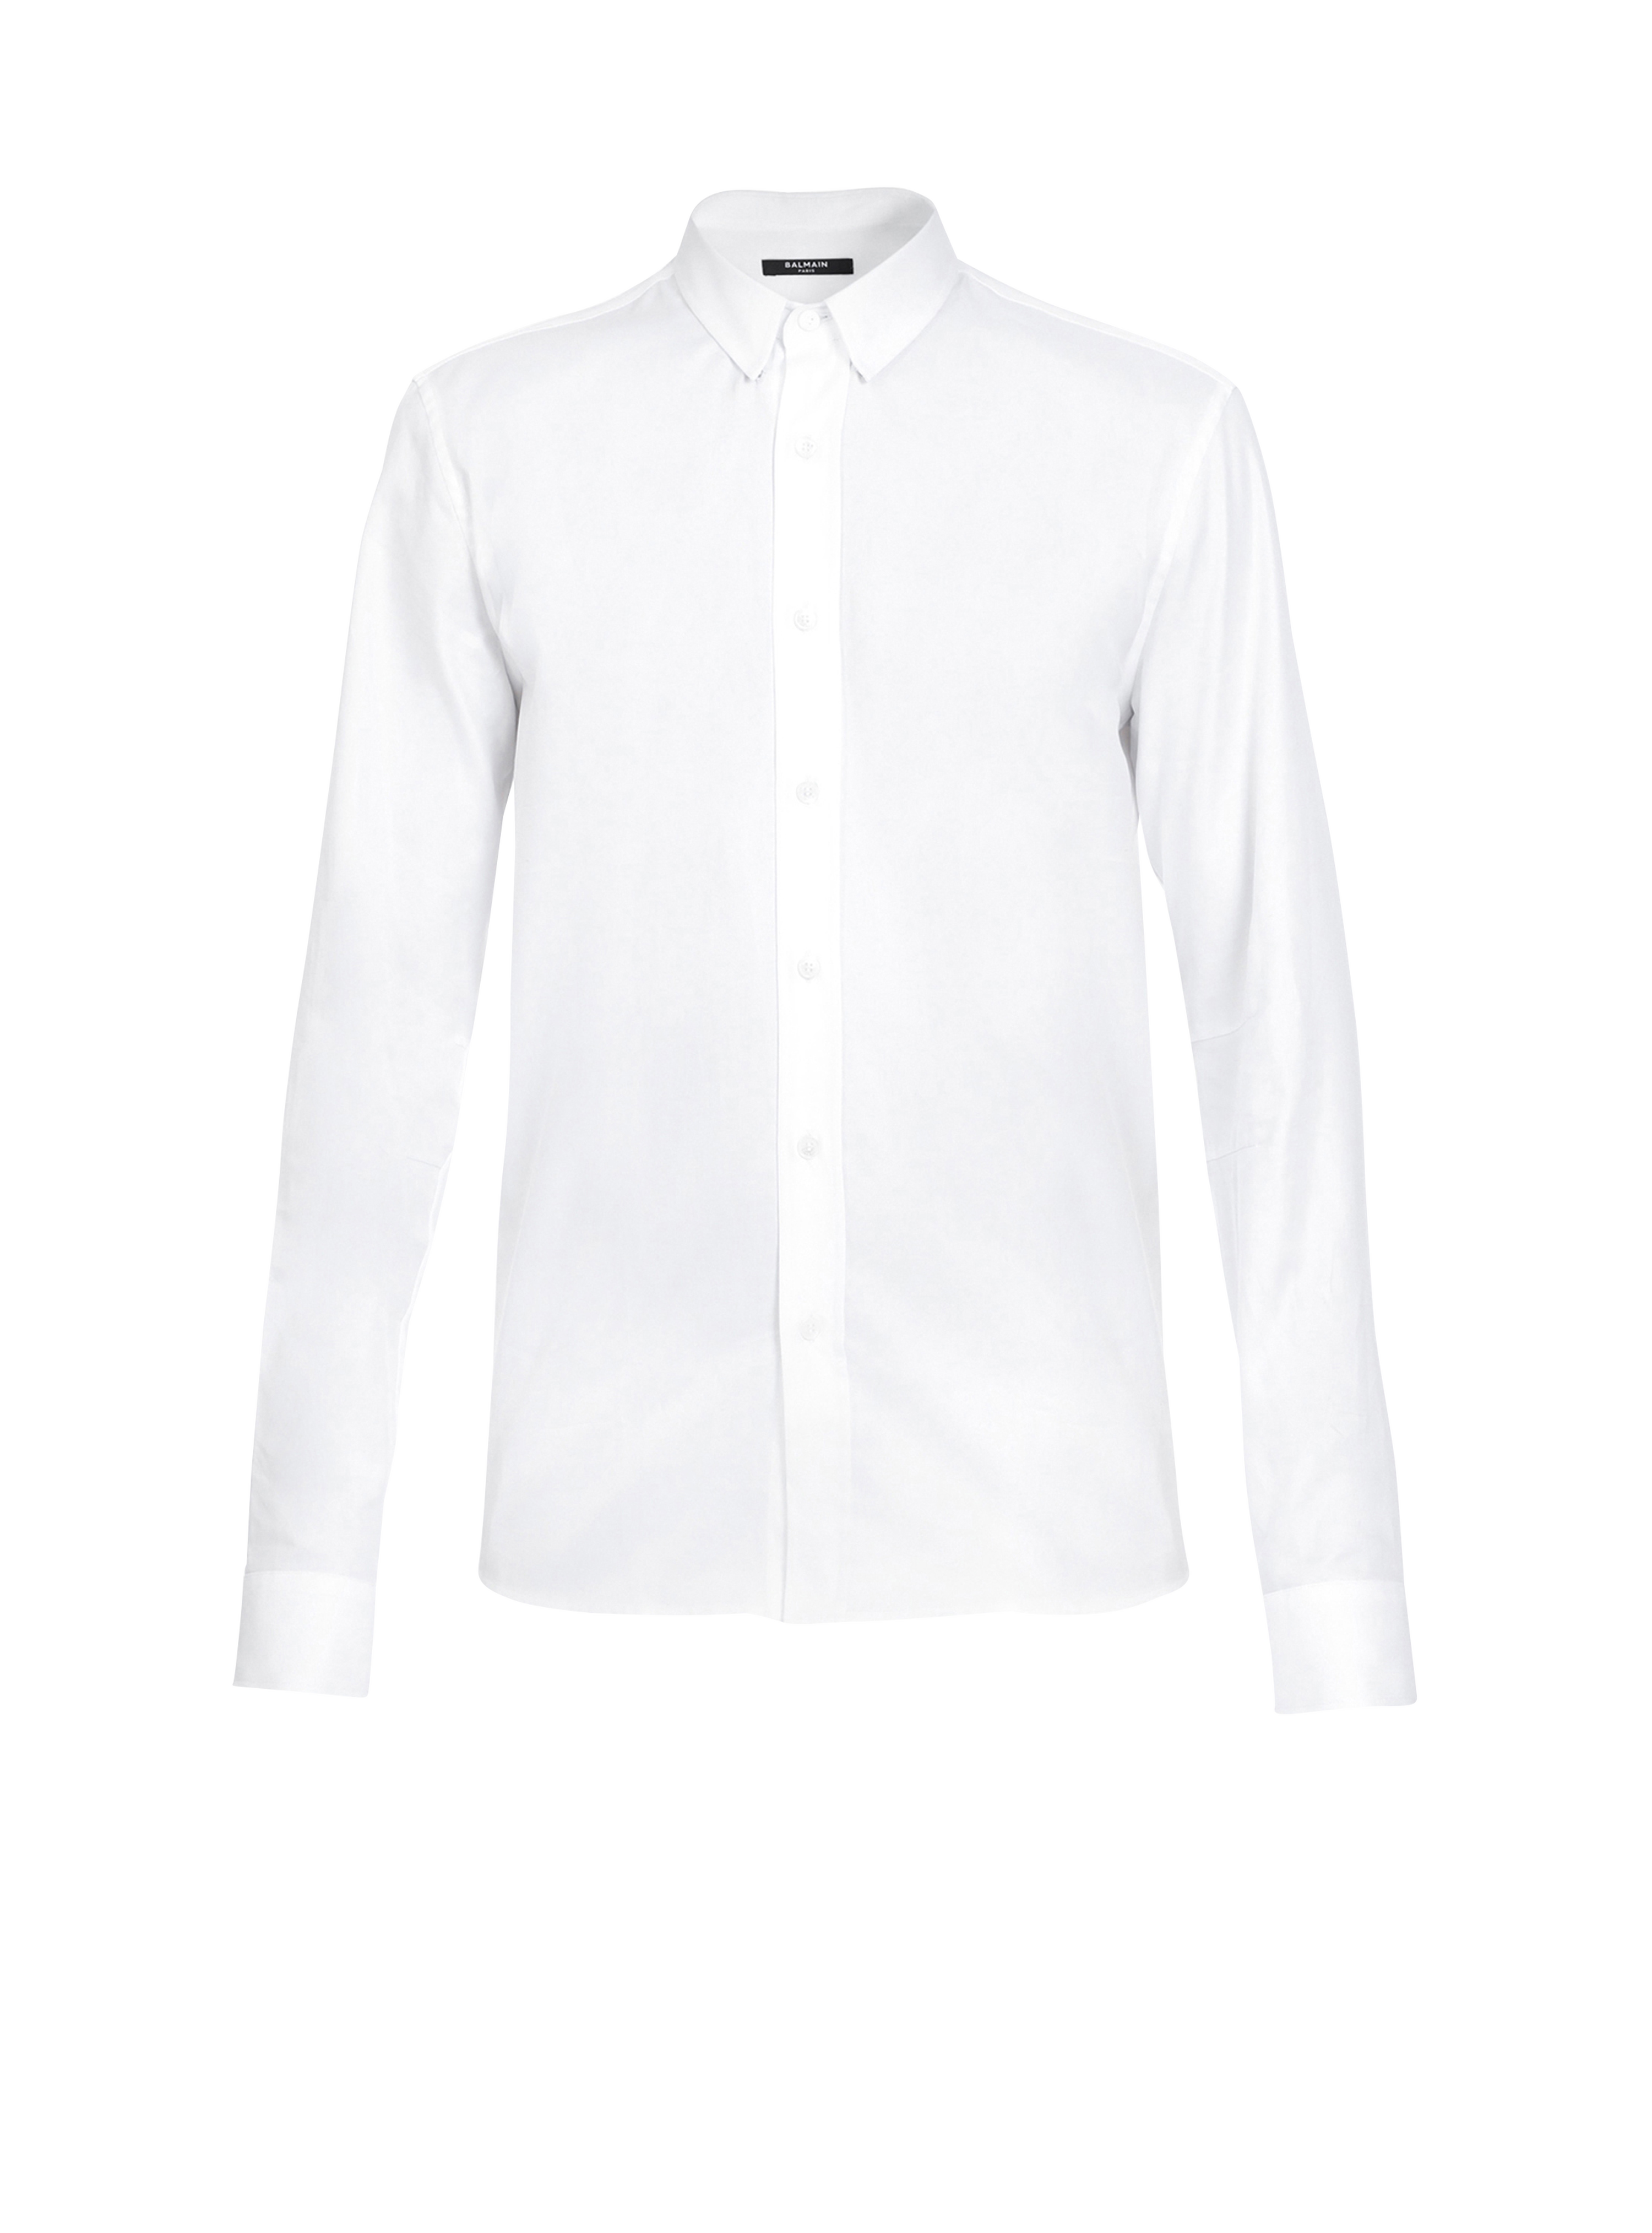 Fitted white cotton shirt, white